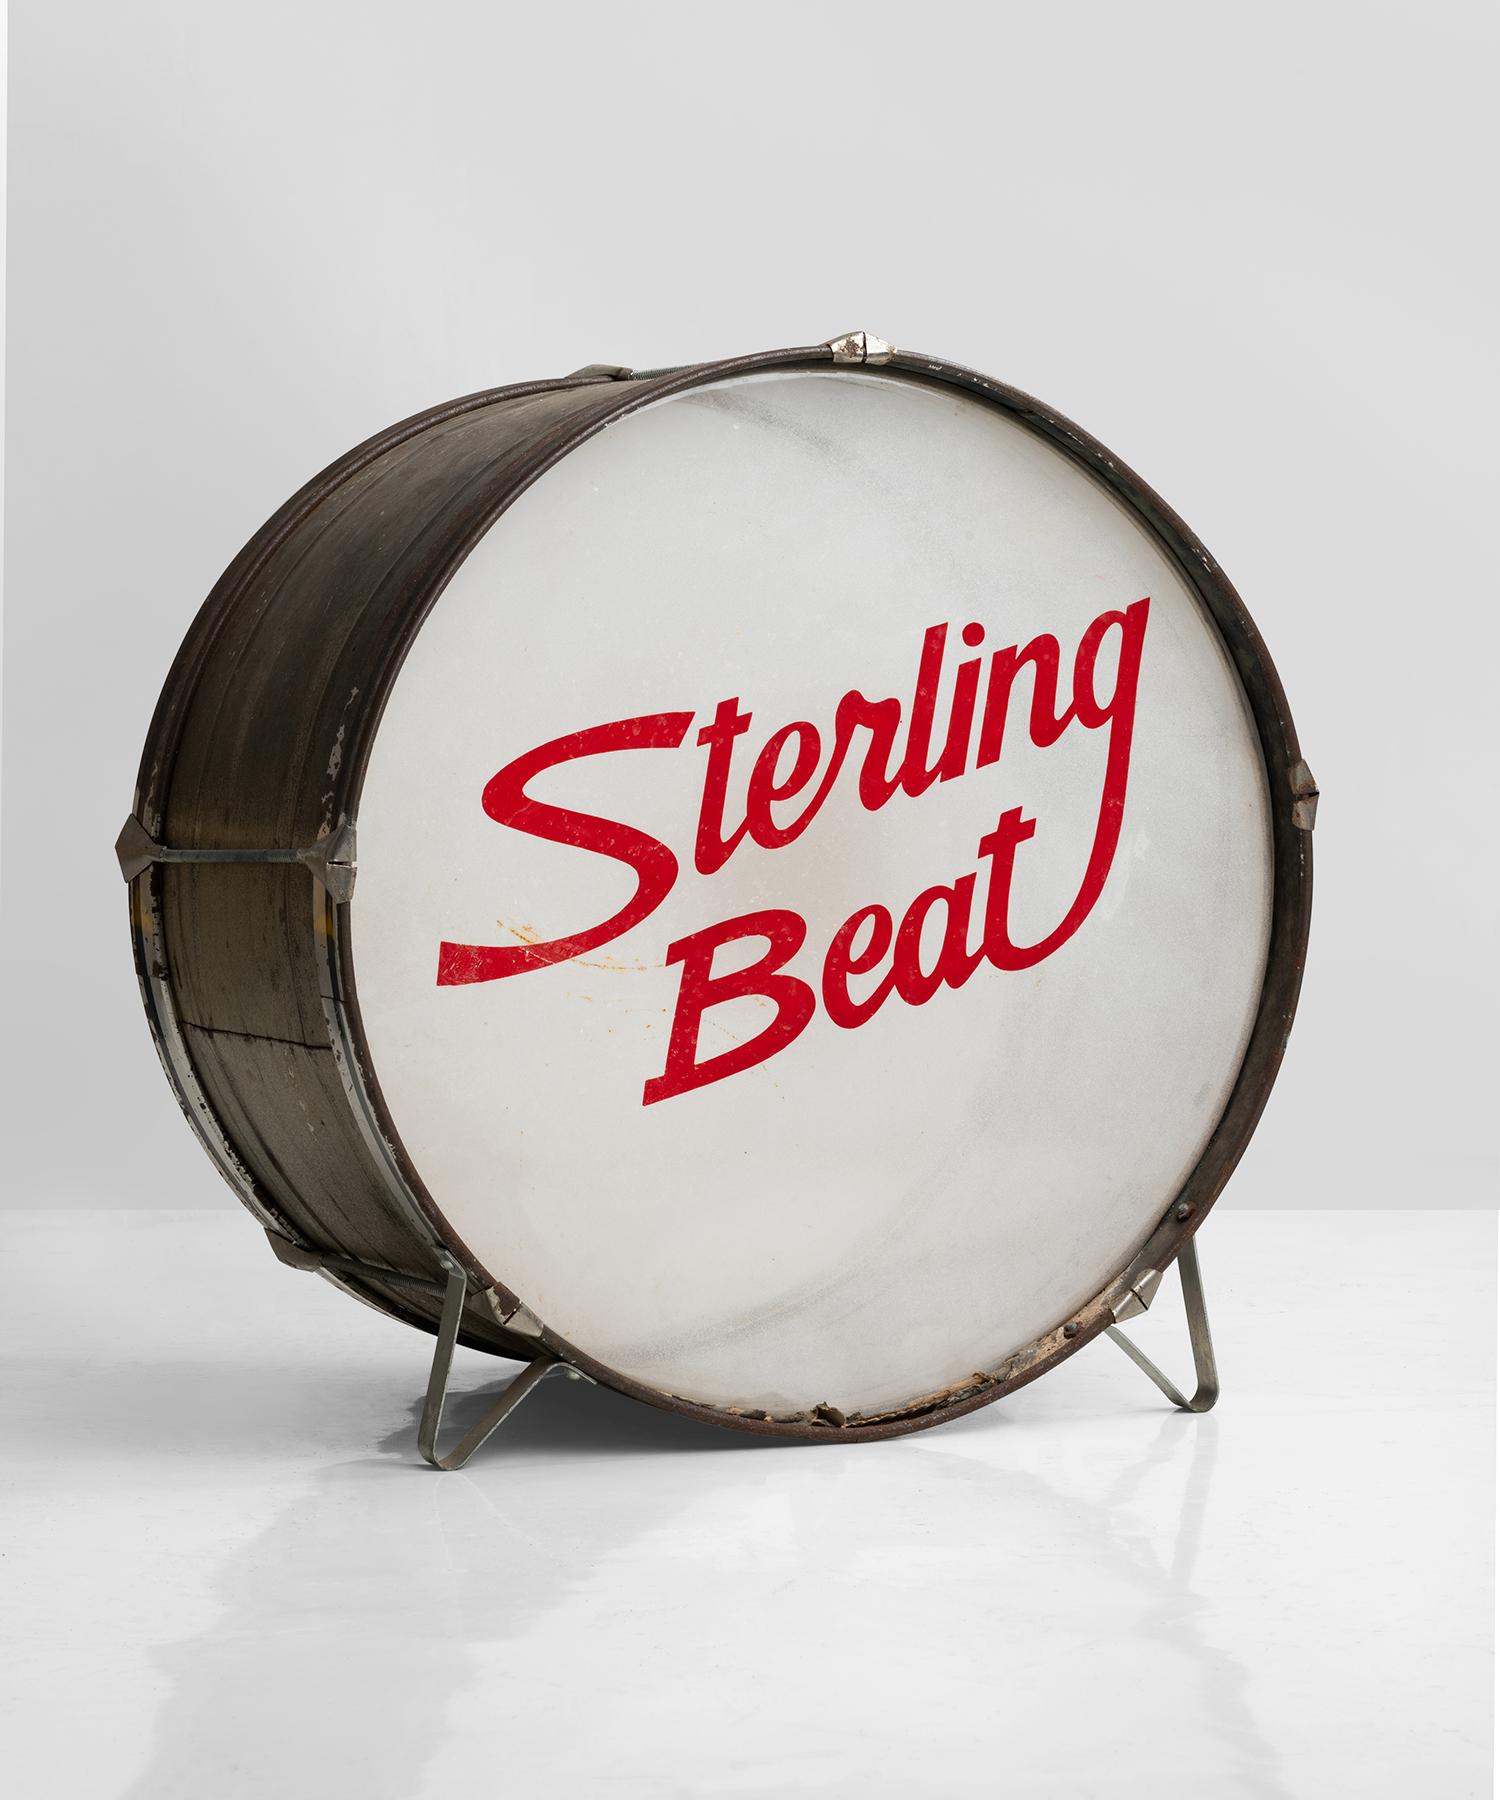 Sterling Beat drum, America, 1977.

#9100 Vintage toy bass drum manufactured by Noble Cooley, with stylish graphics and metal surround.